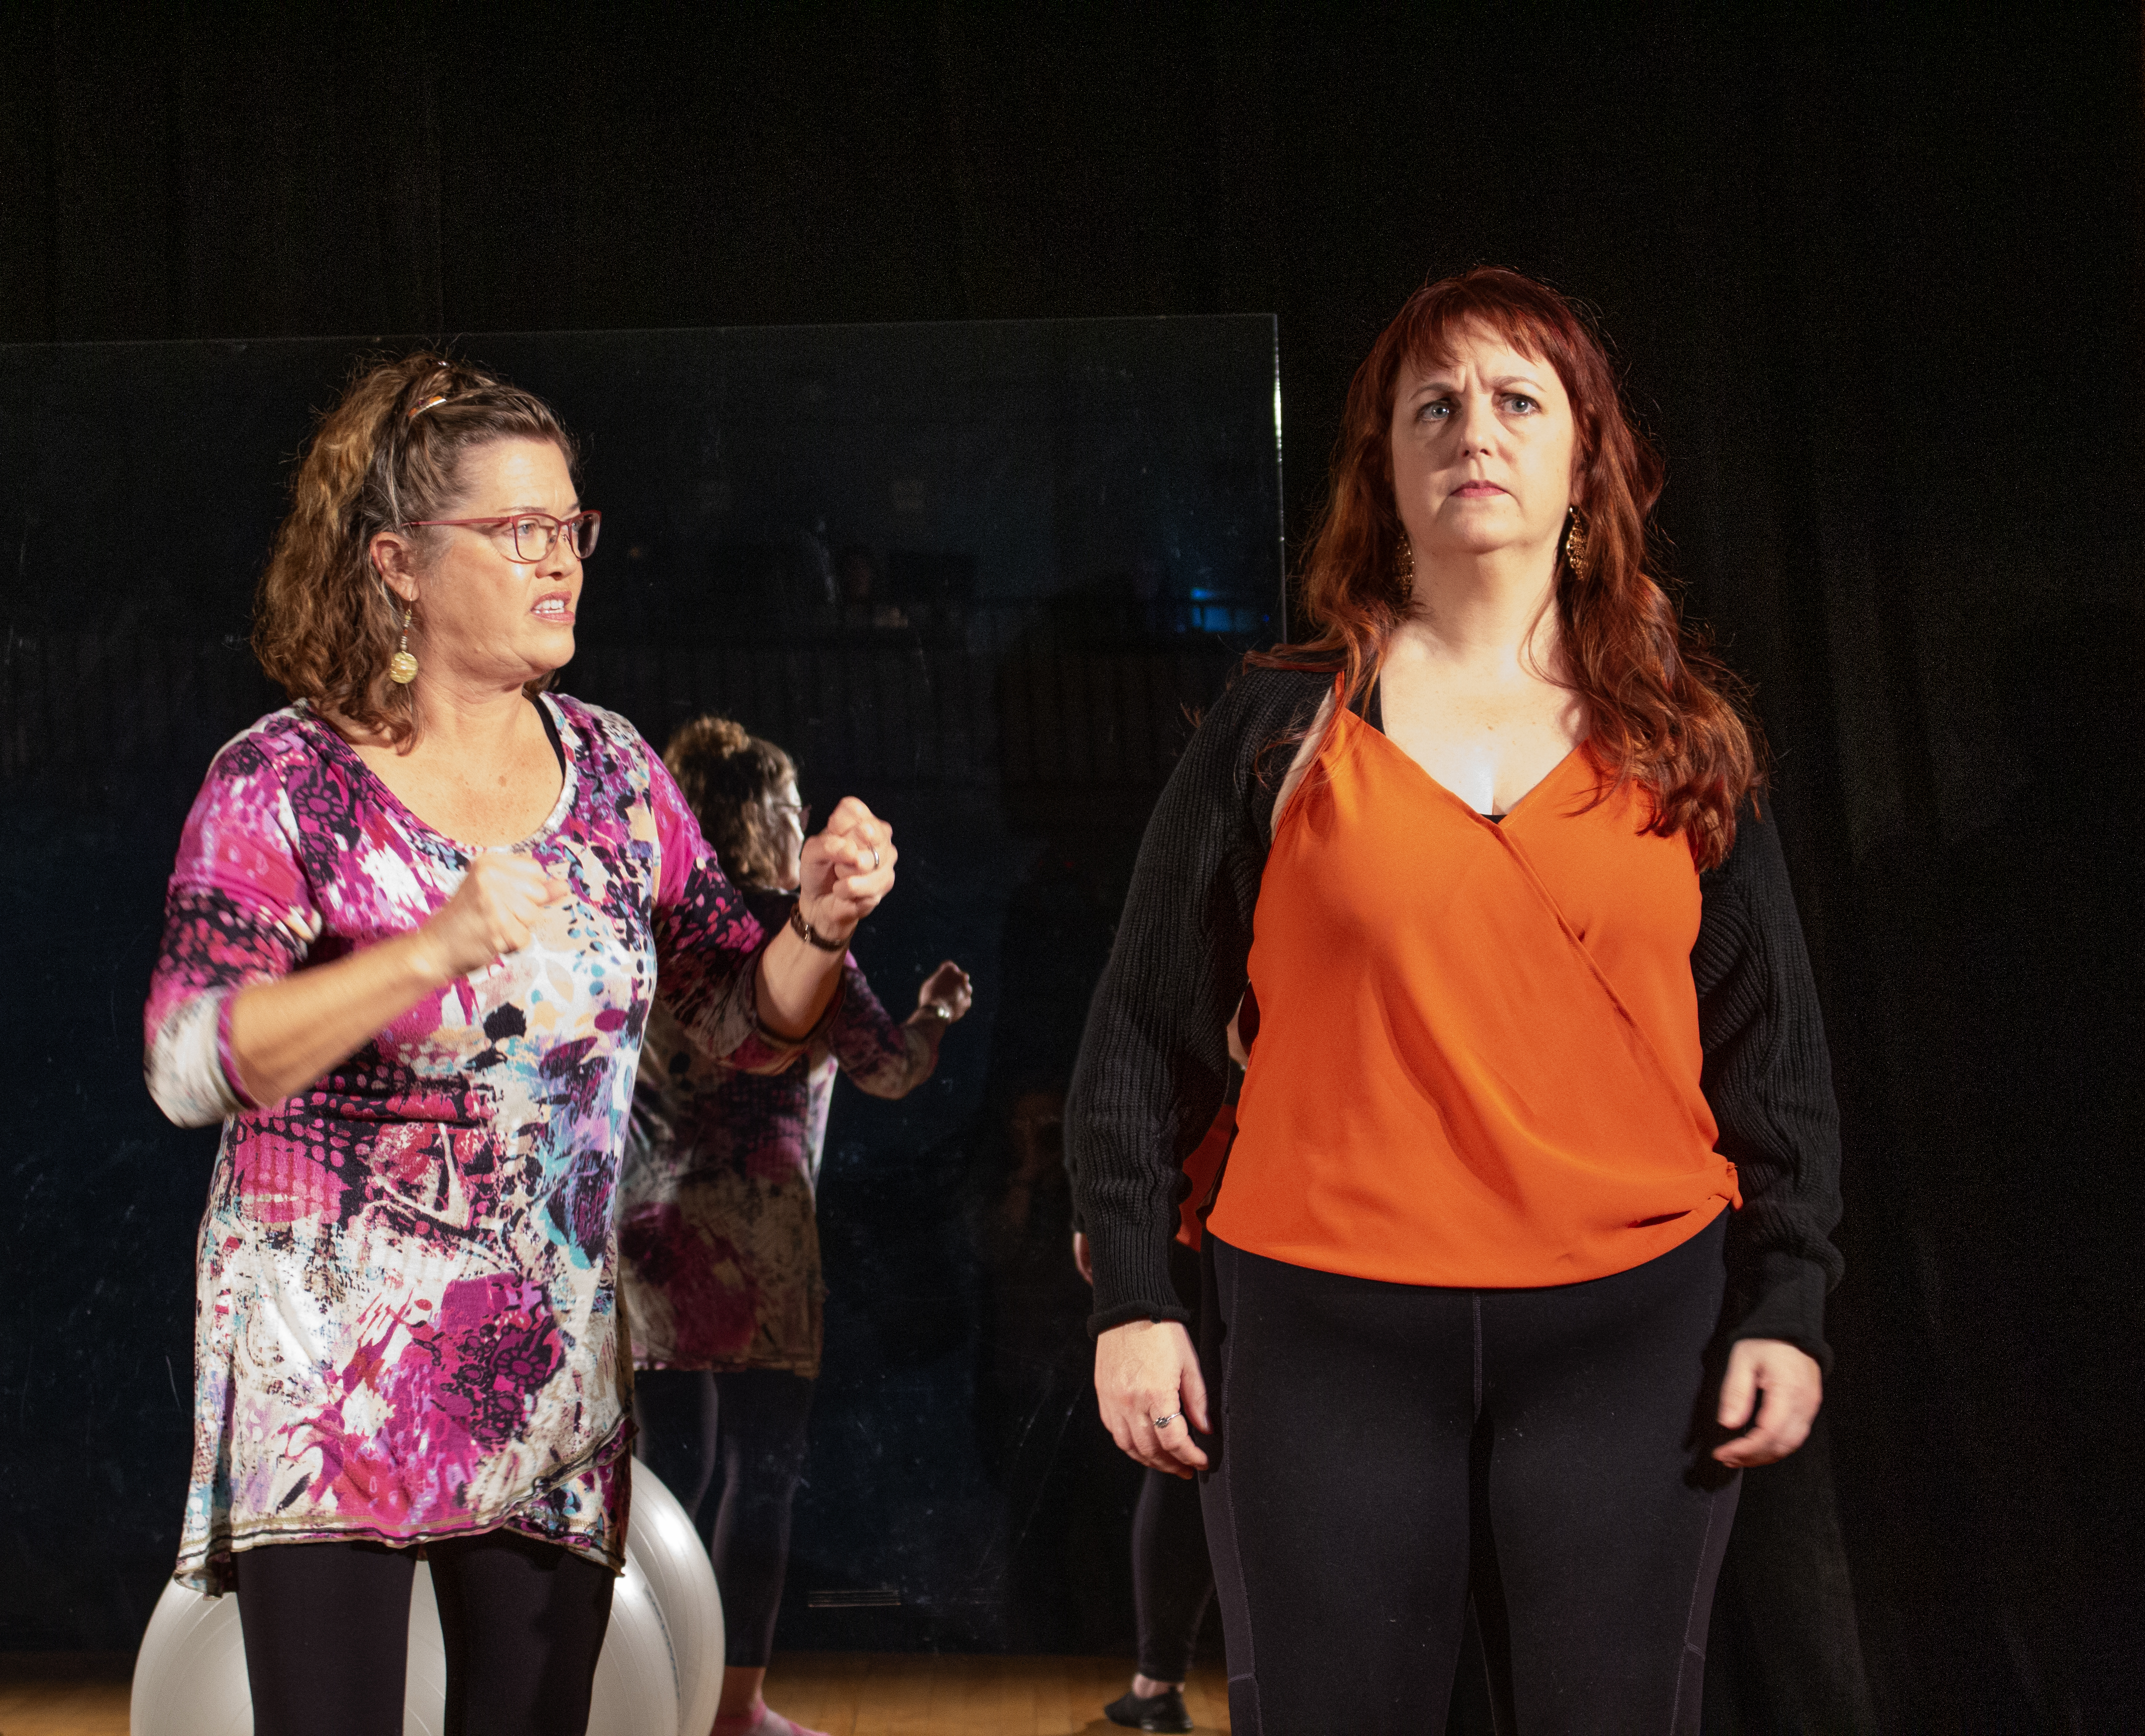 Marty (Elizabeth Bates) coaches Theresa (Kym Taylor) in Circle Mirror Transformation with The Shelburne Players.